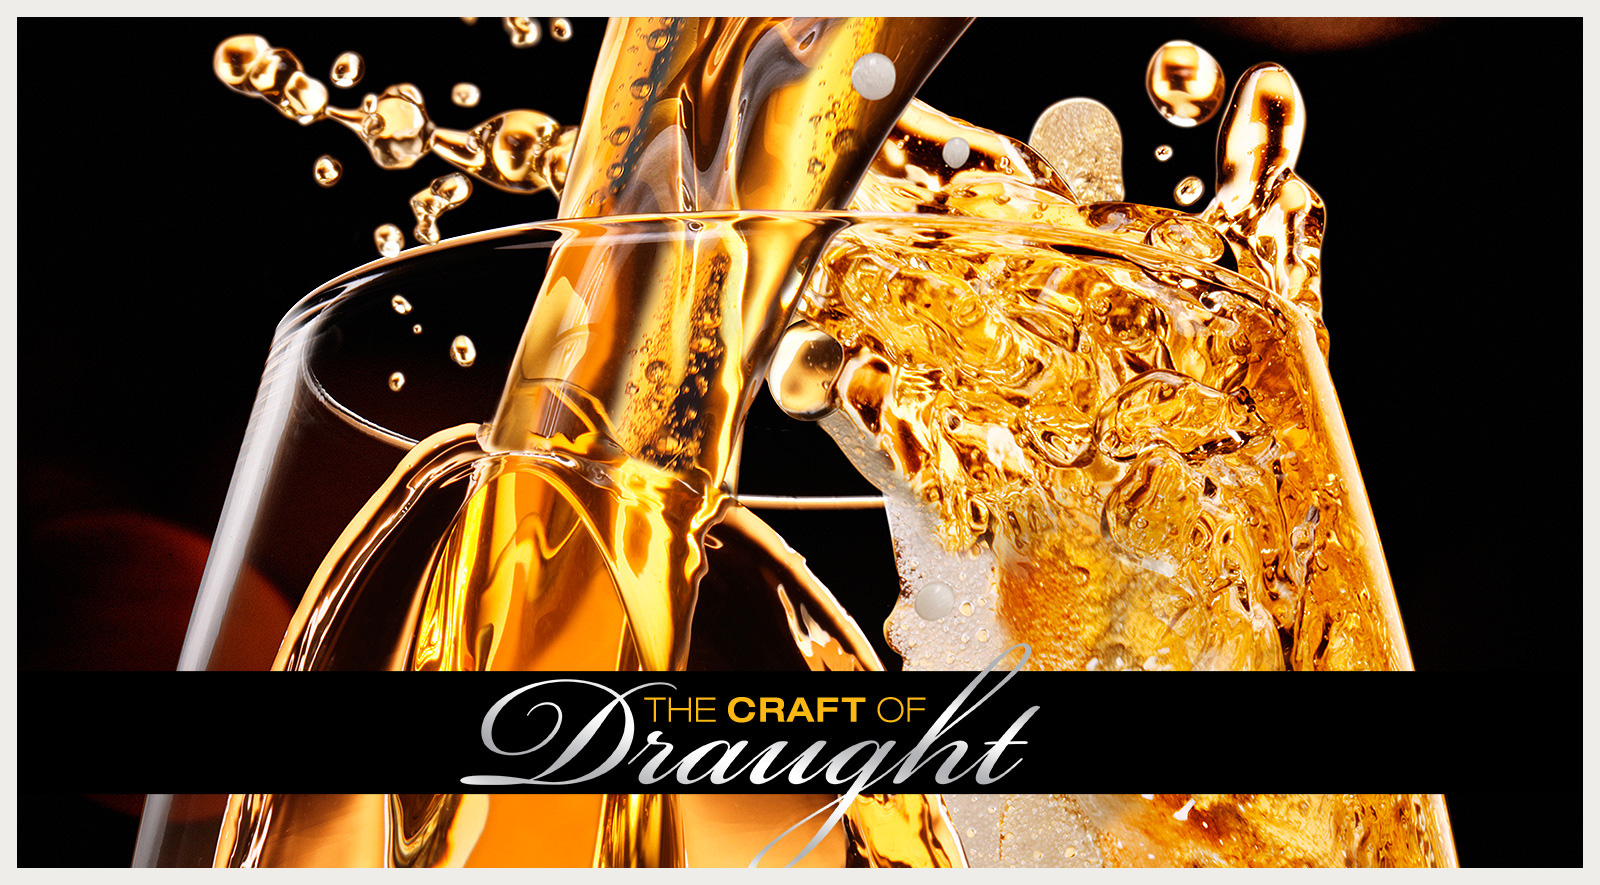 craft-of-draught-01@2x